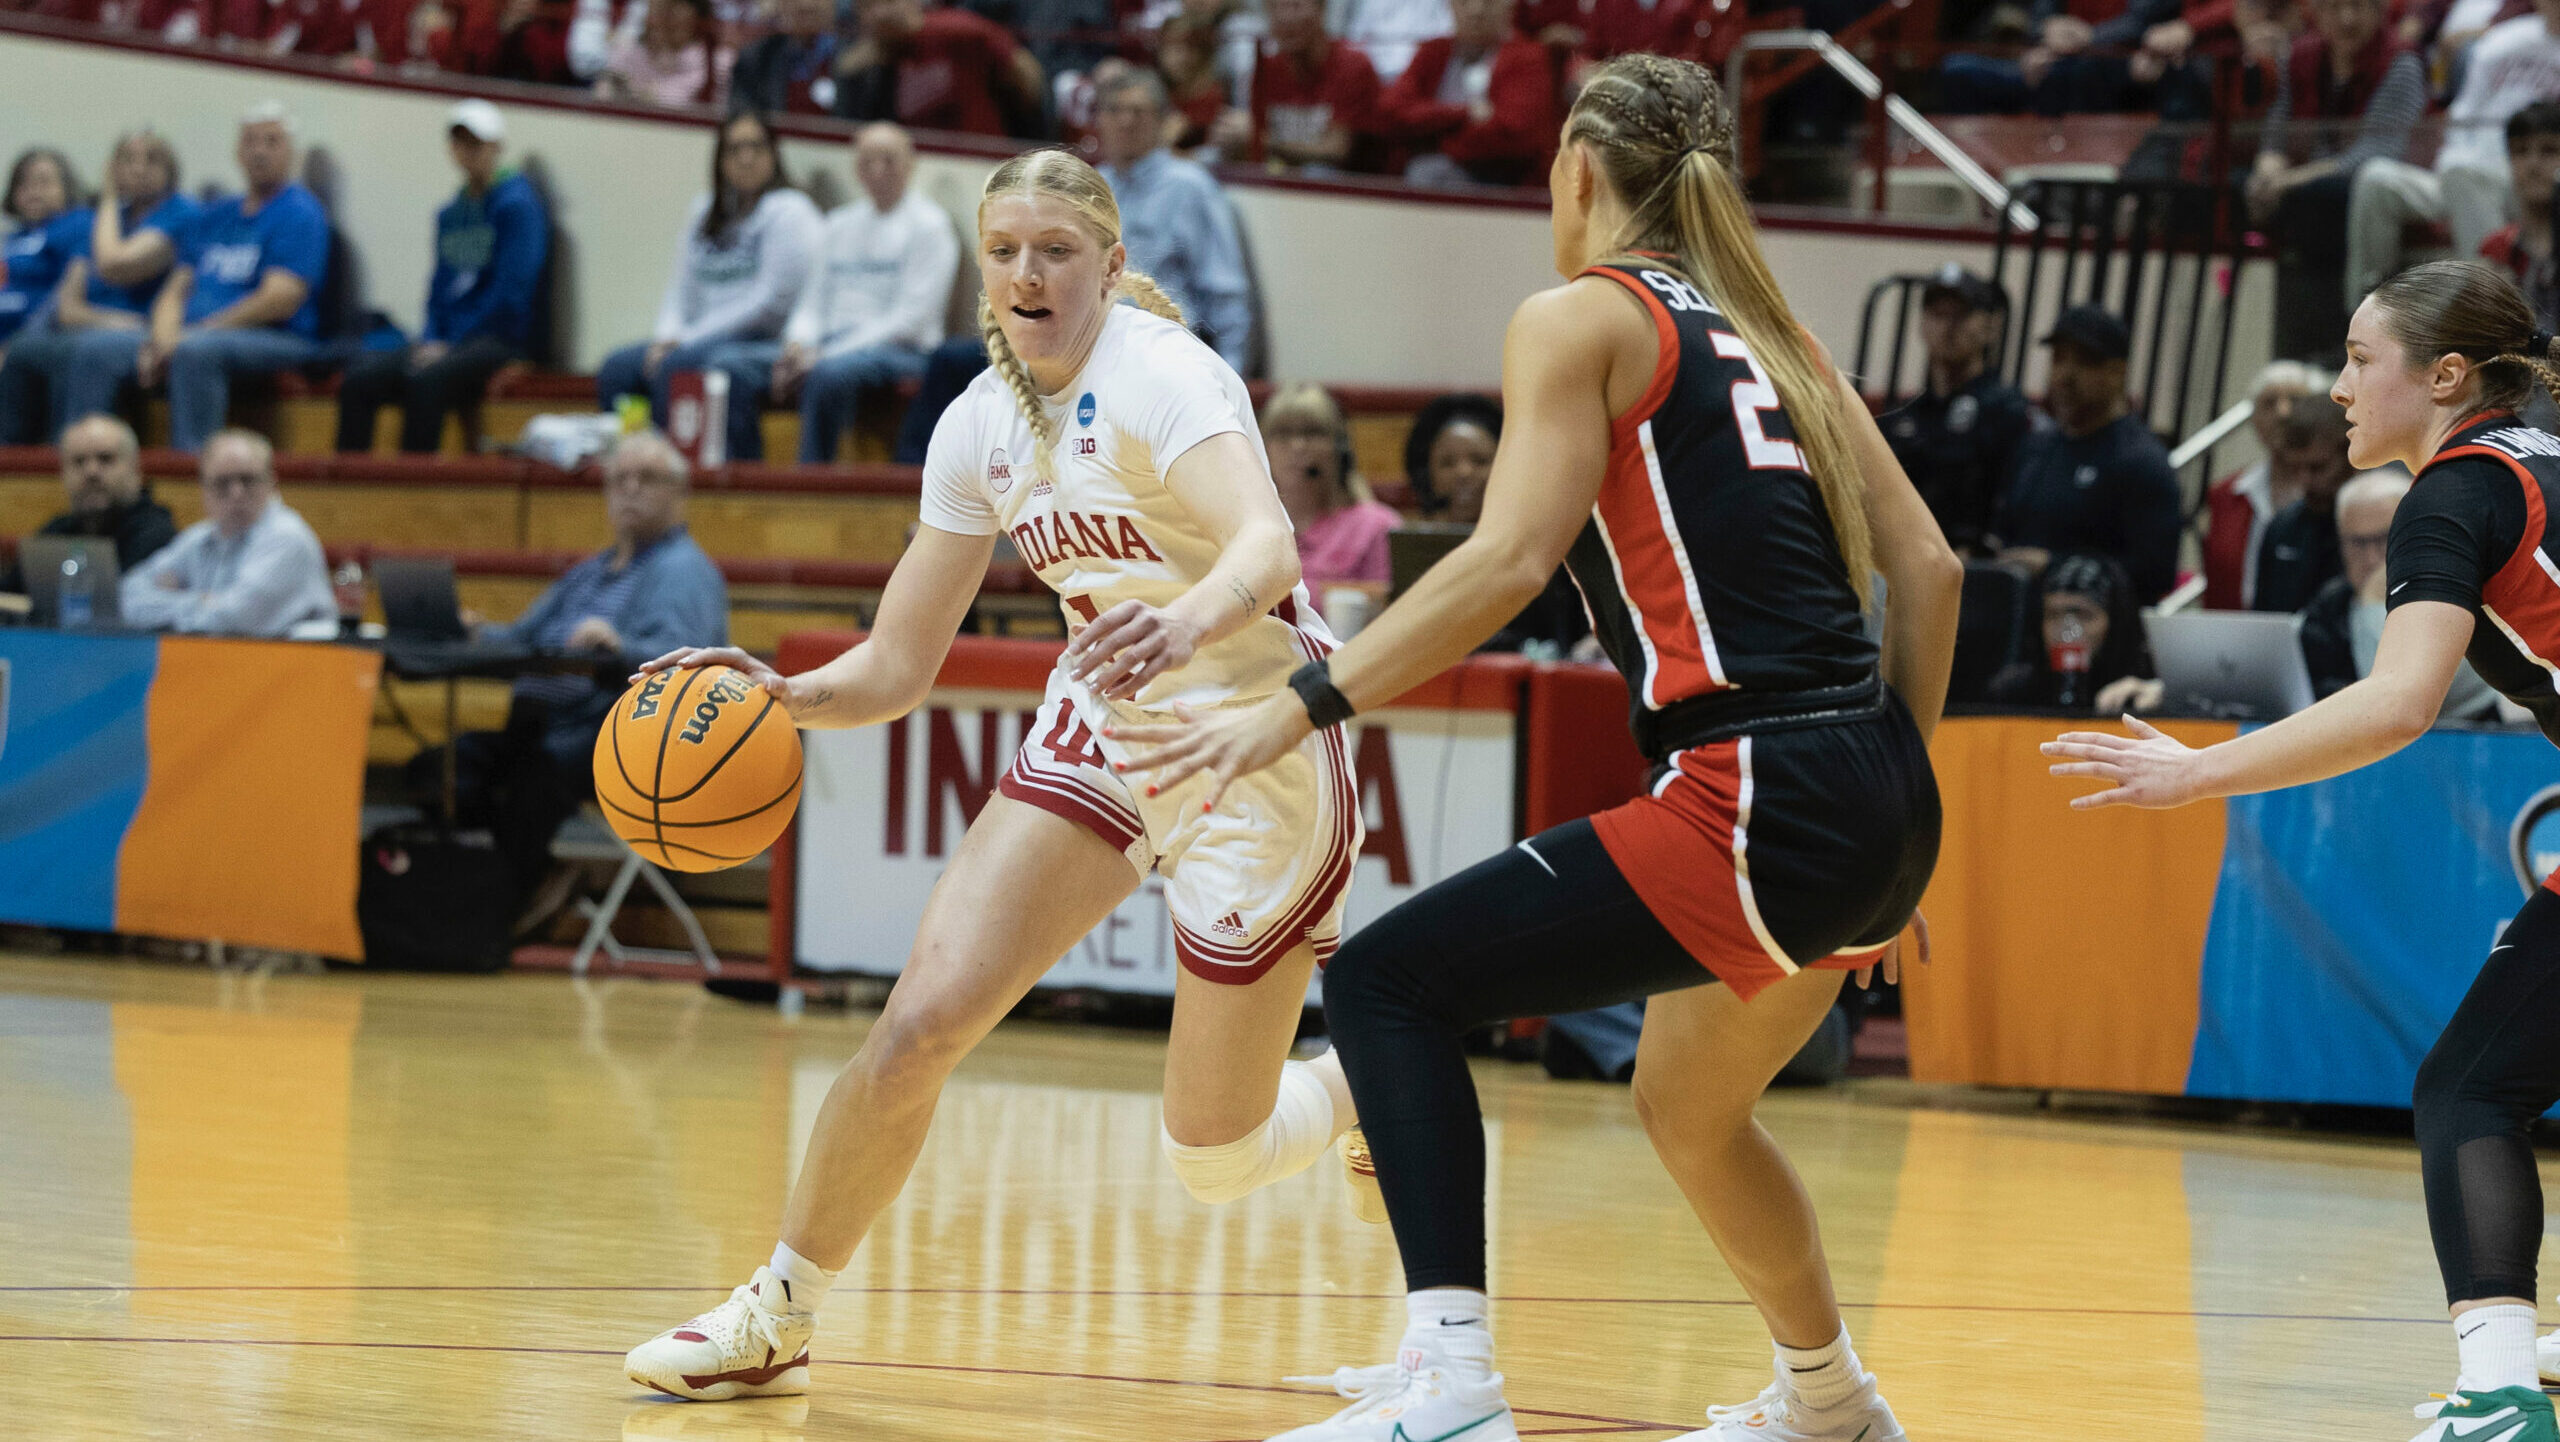 Survive and Dance – Indiana takes down Fairfield 89-56